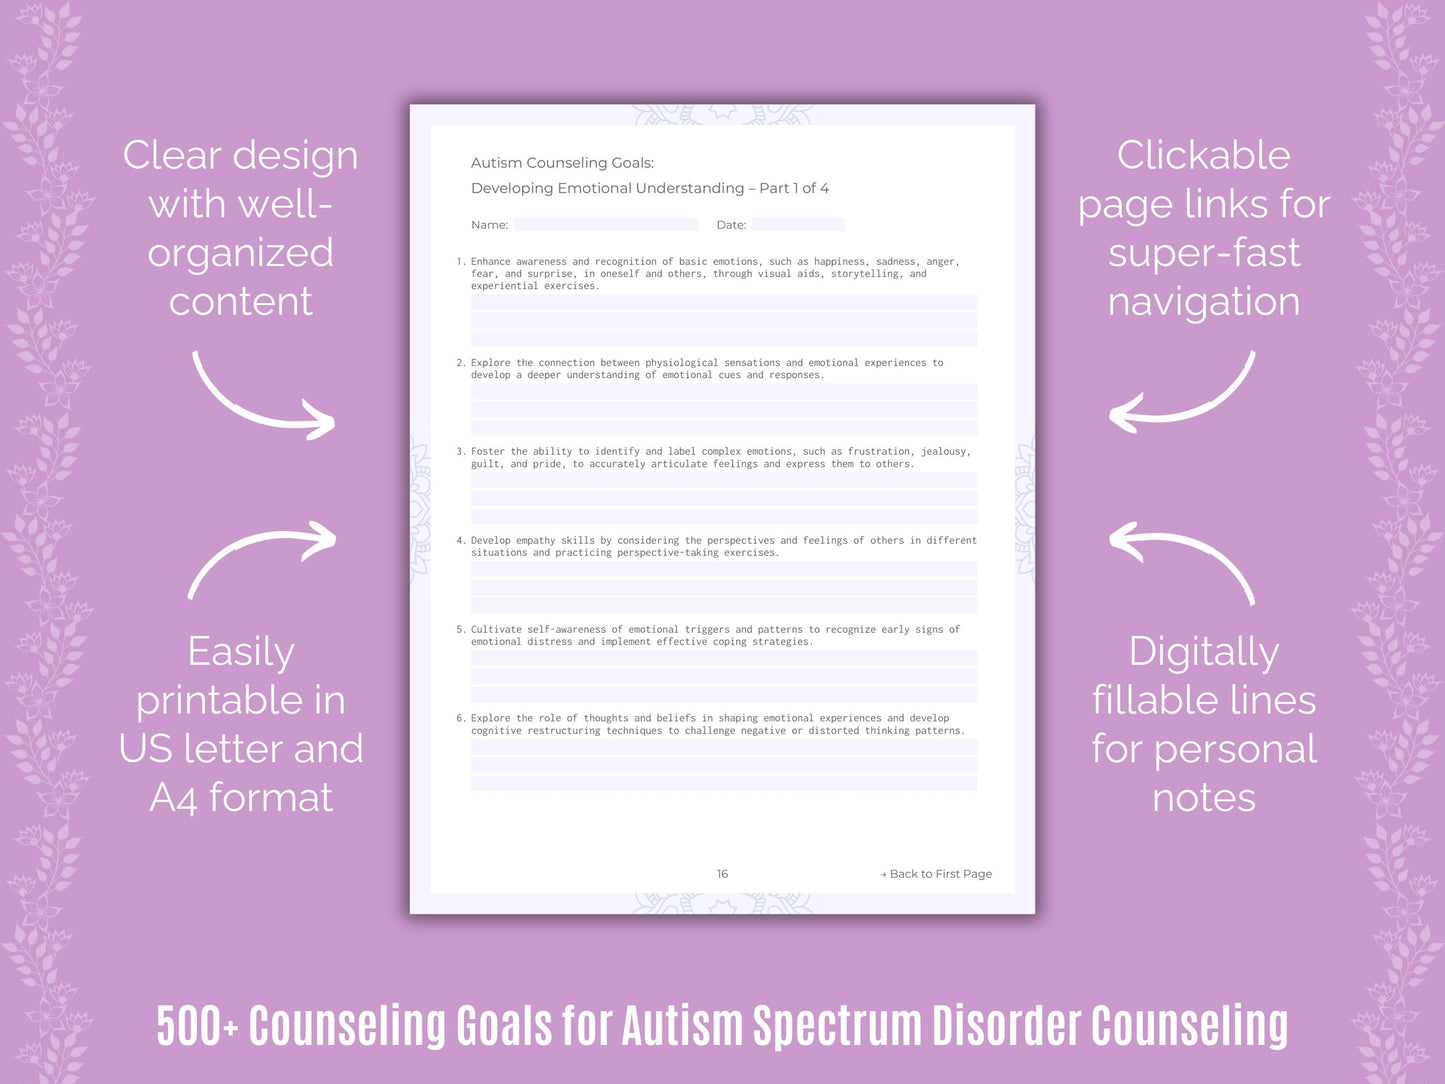 Autism Spectrum Disorder Counseling Goals Resource